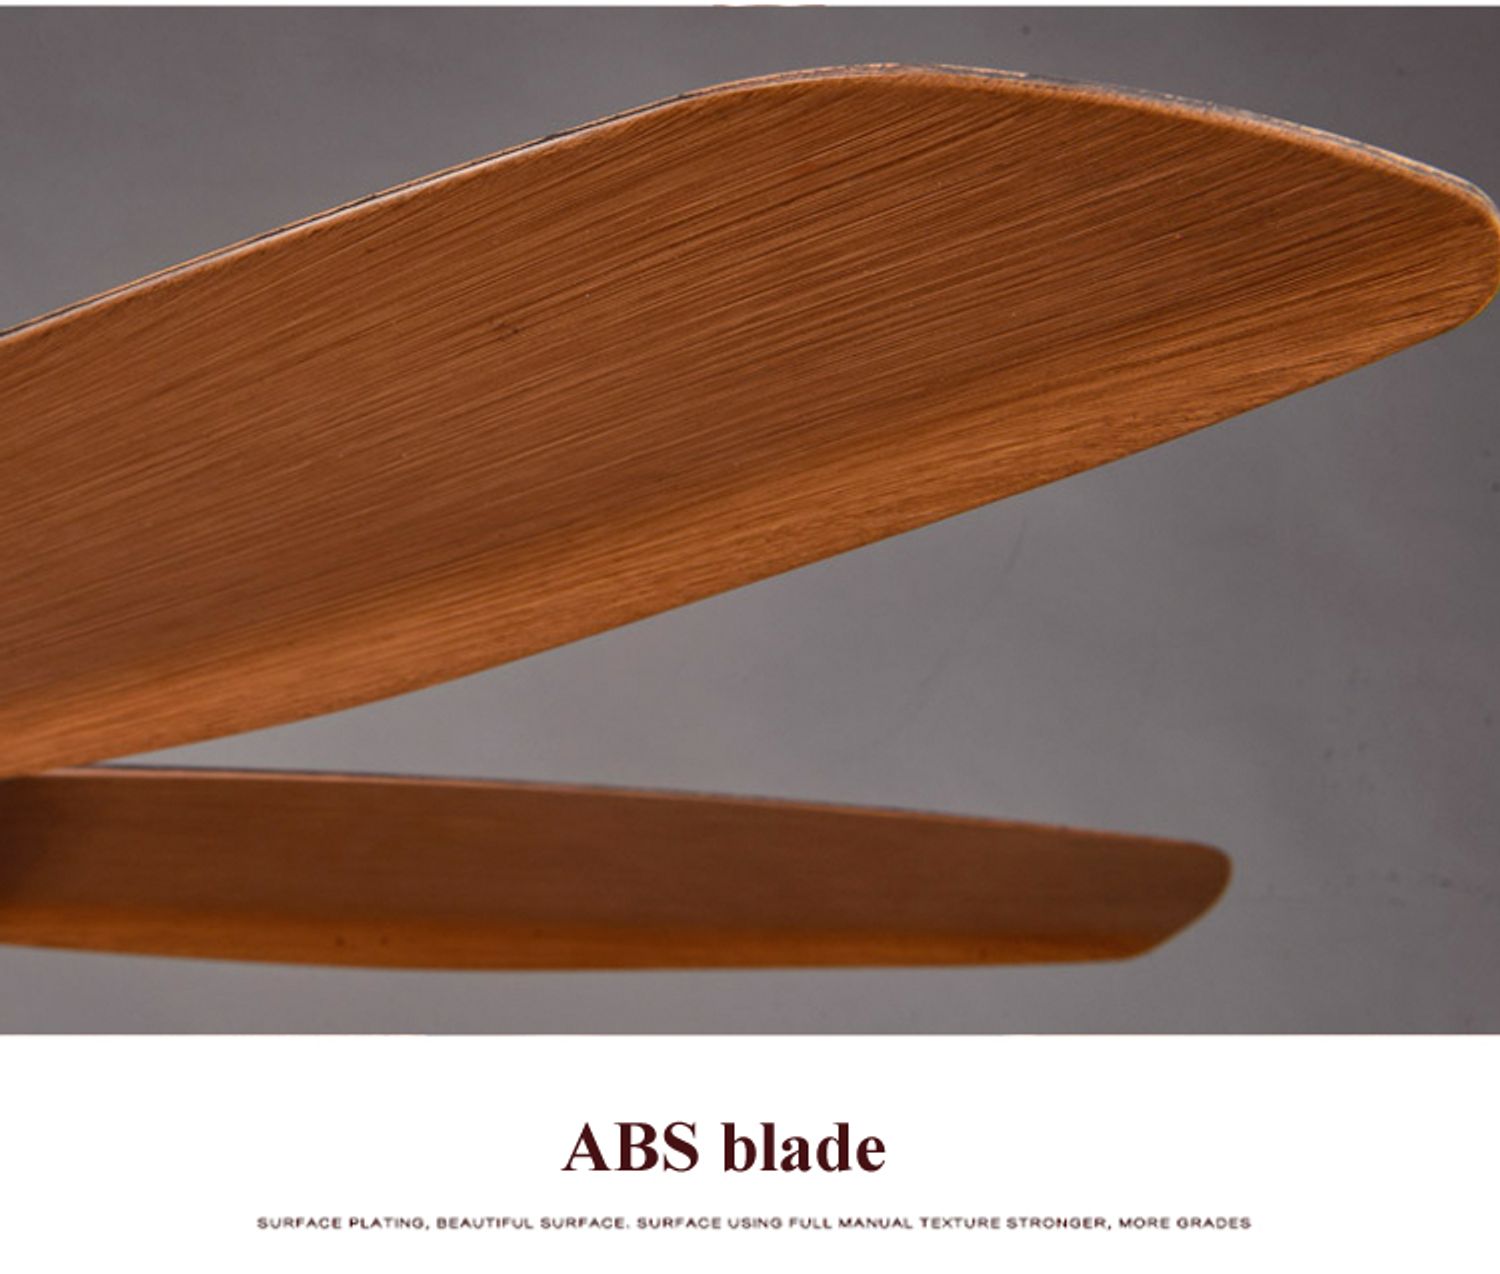 KBS modern ceiling fan with ABS blade for wholesale